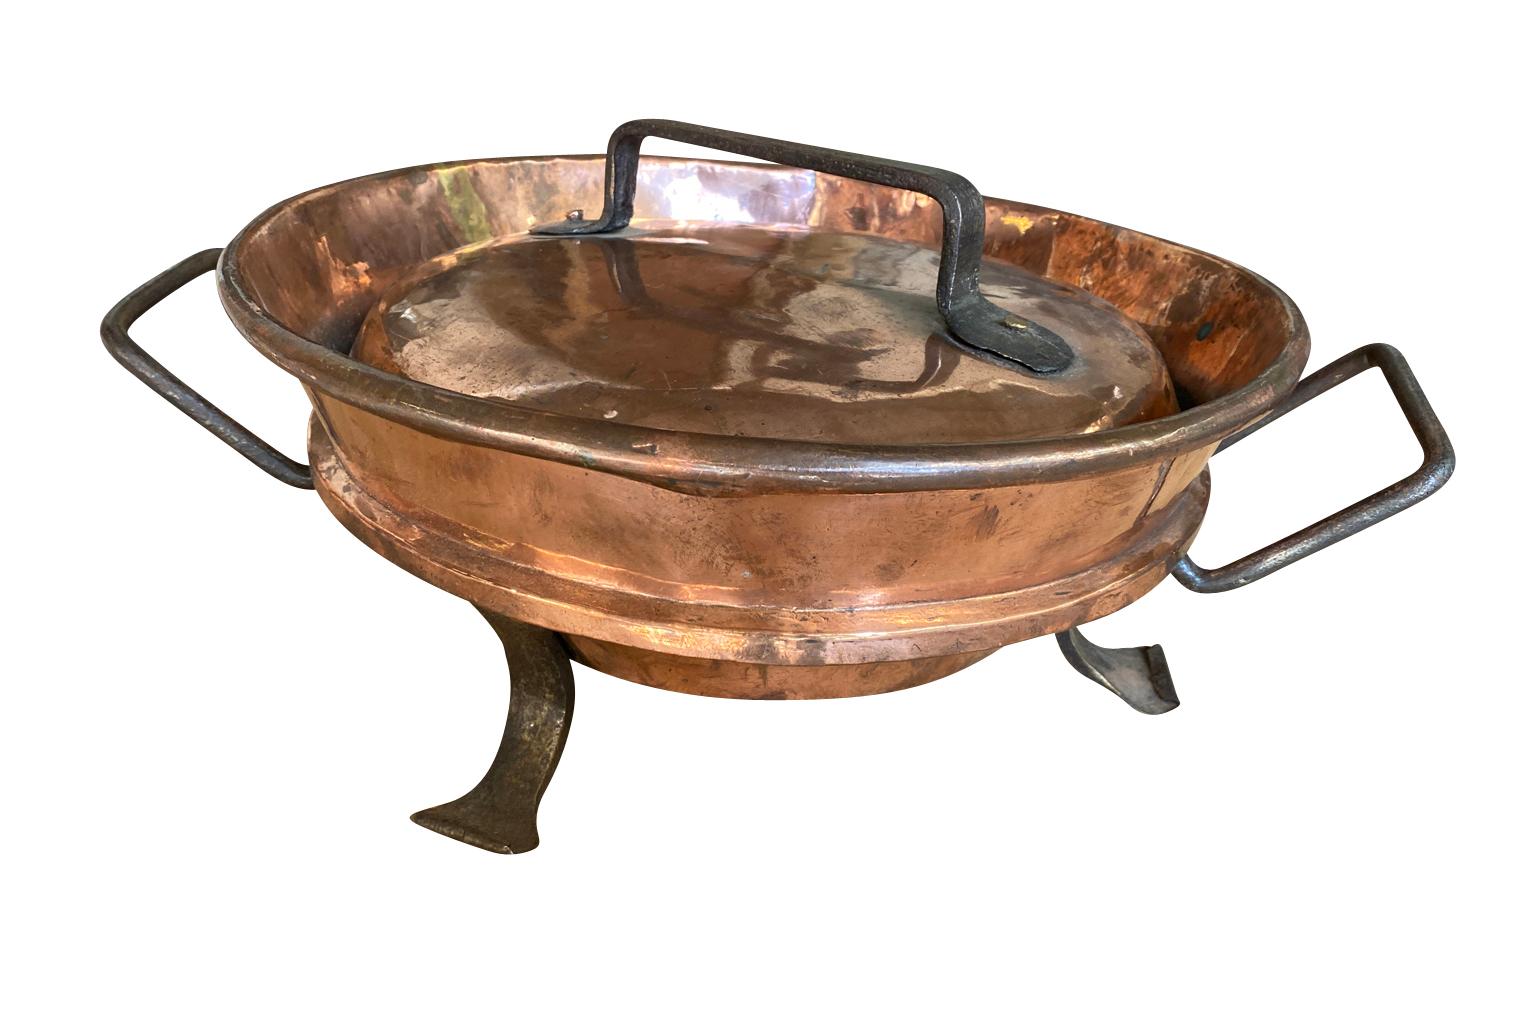 A charming 18th century Tortiere from the Southwest of France.  This handsome piece is crafted from heavy gauge copper raised on feet with its lid.  Tortieres were used to prepare and serve Tortas - a delicious omlette with potatoes and onions.